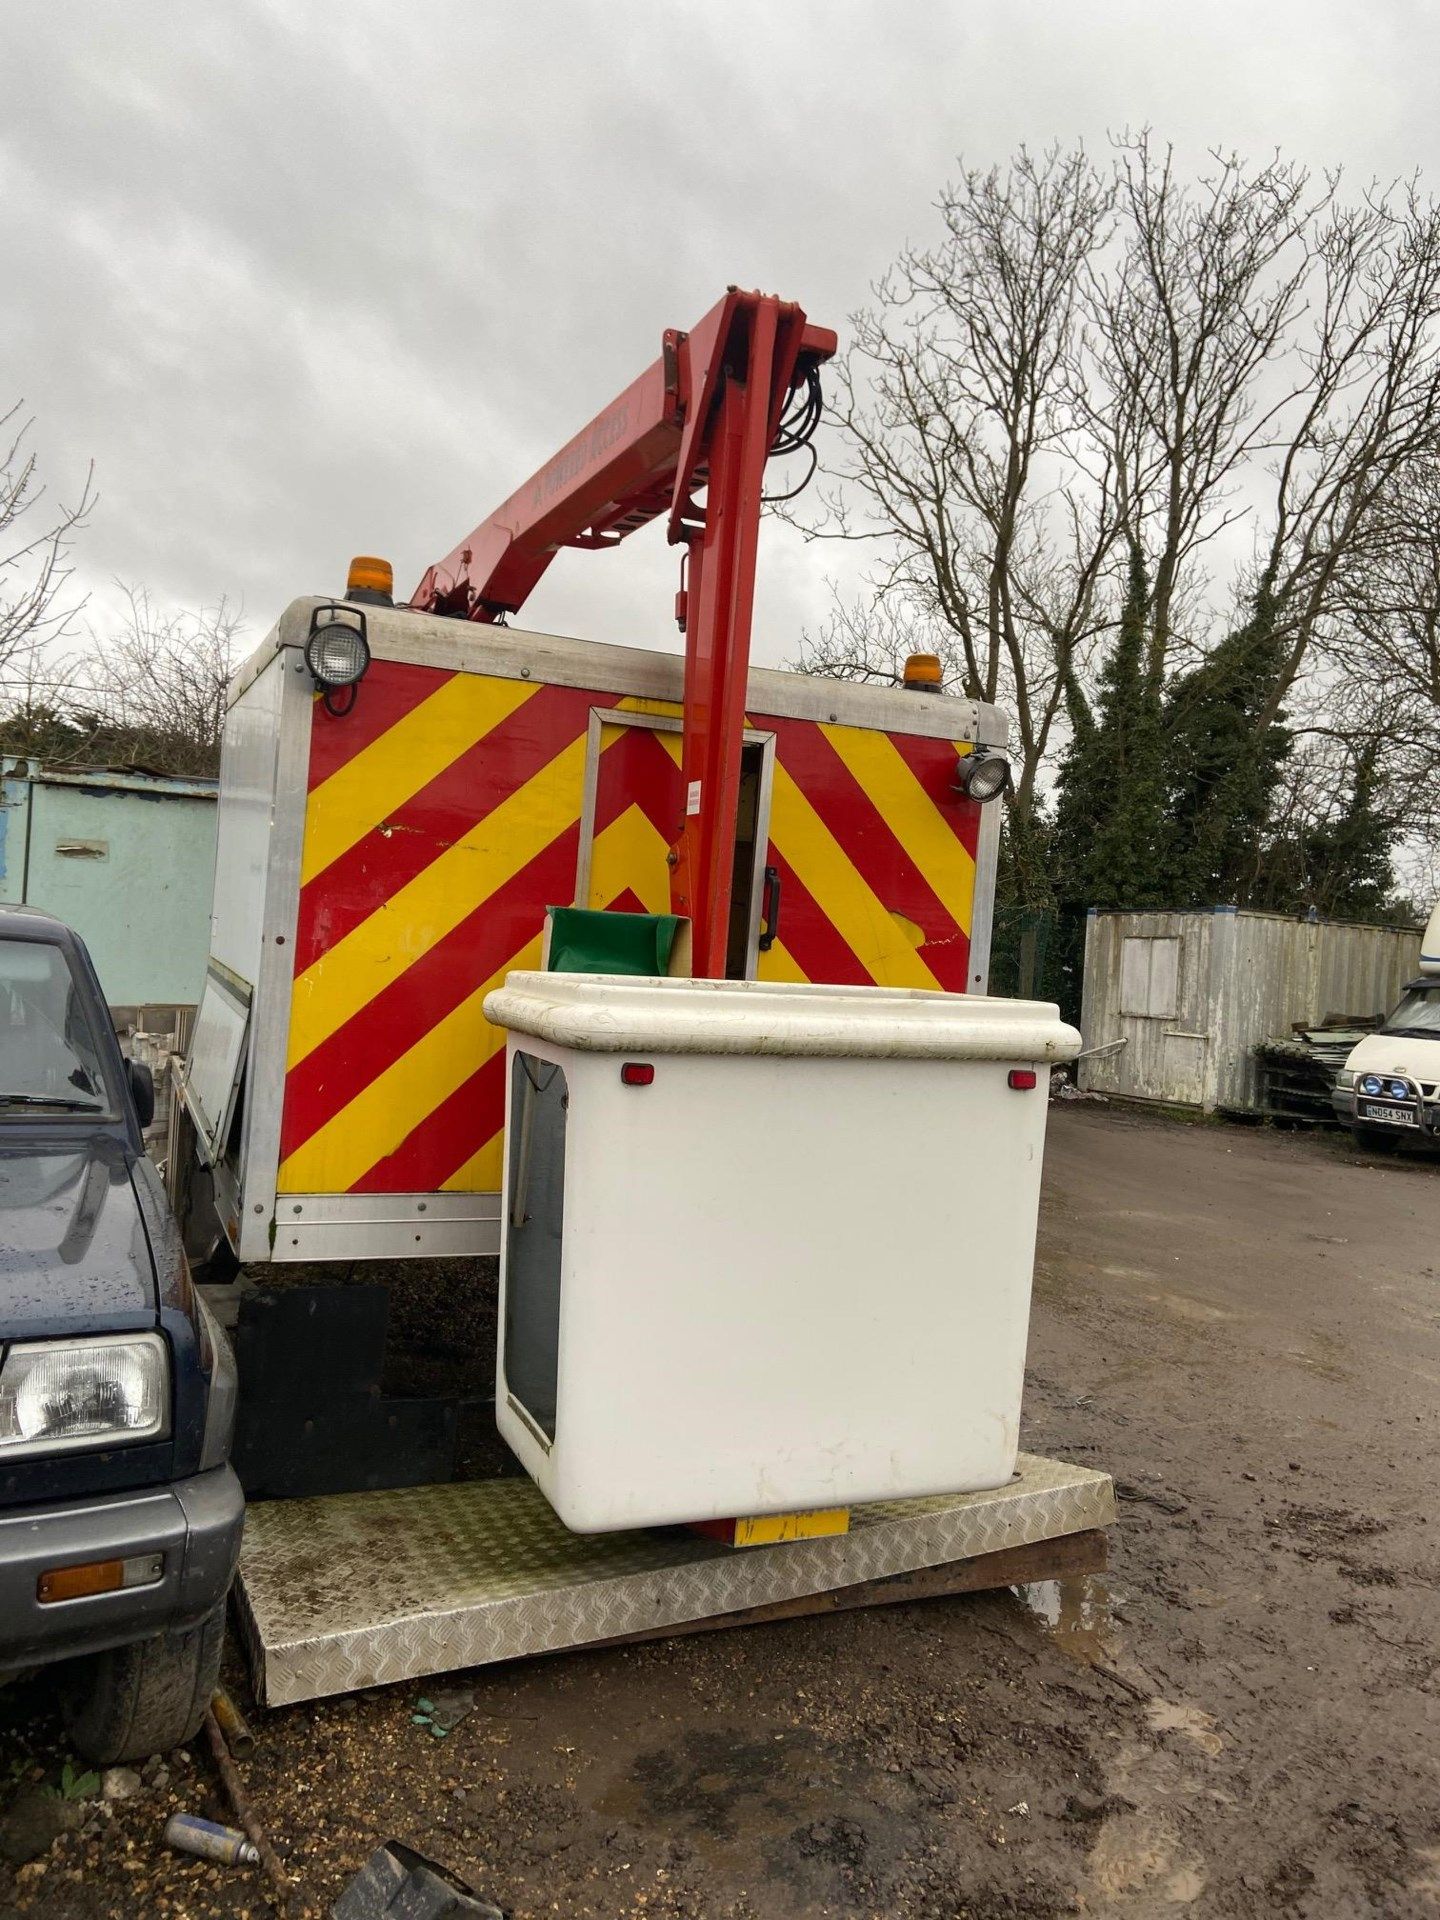 2009 POWER ACCESS PA145 14.5 METER CHERRY PICKER, SELF CONTAINED SO RUNS OFF 24V *PLUS VAT* - Image 3 of 7